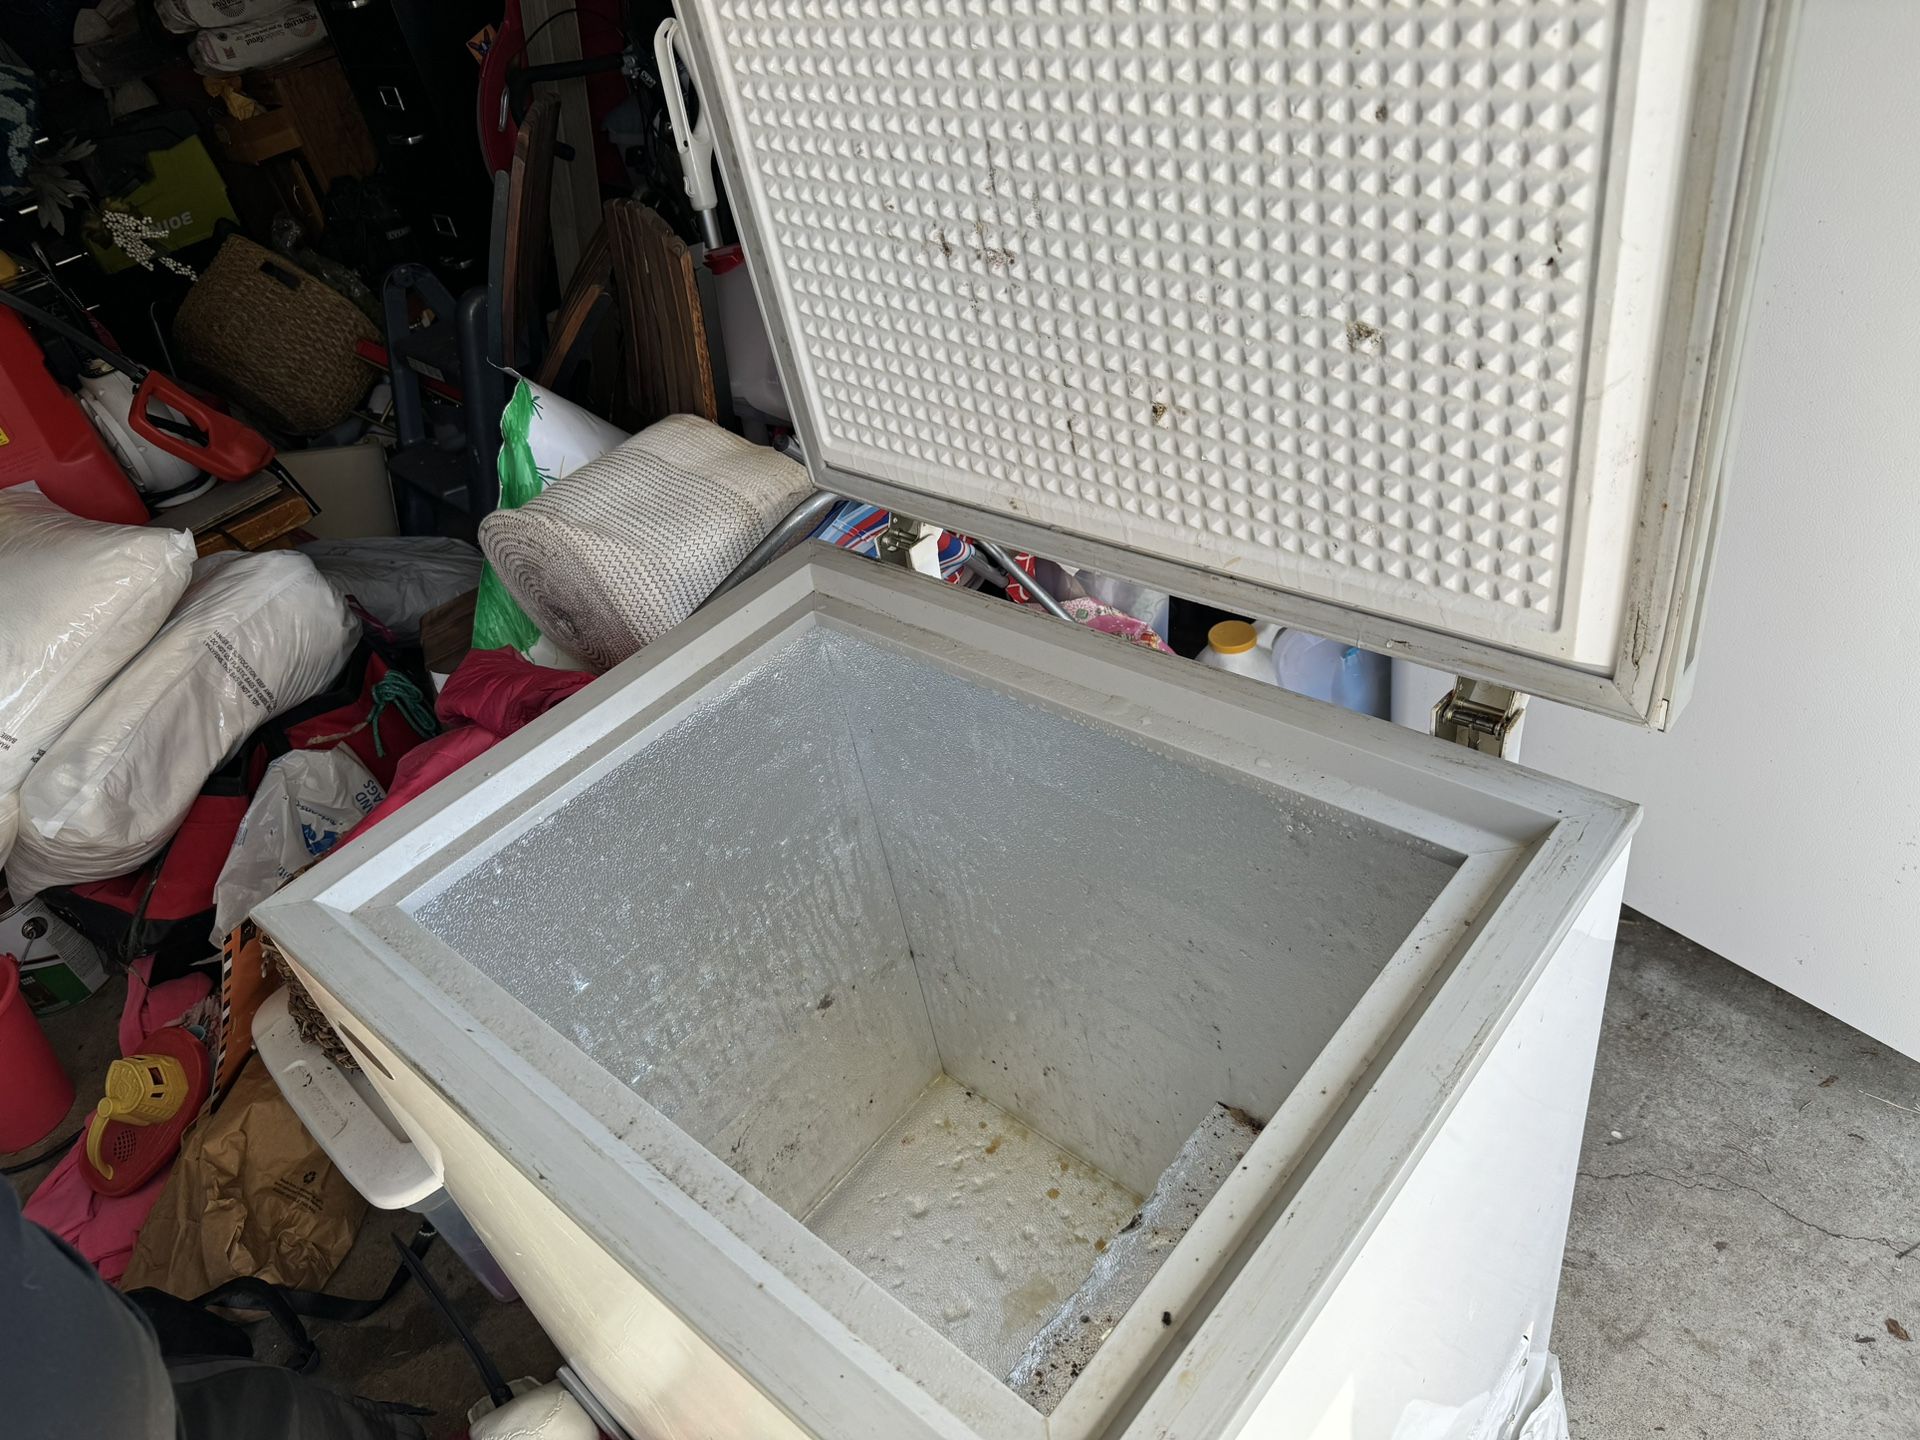 Small Deep Freezer  $35 Need Gone Today 